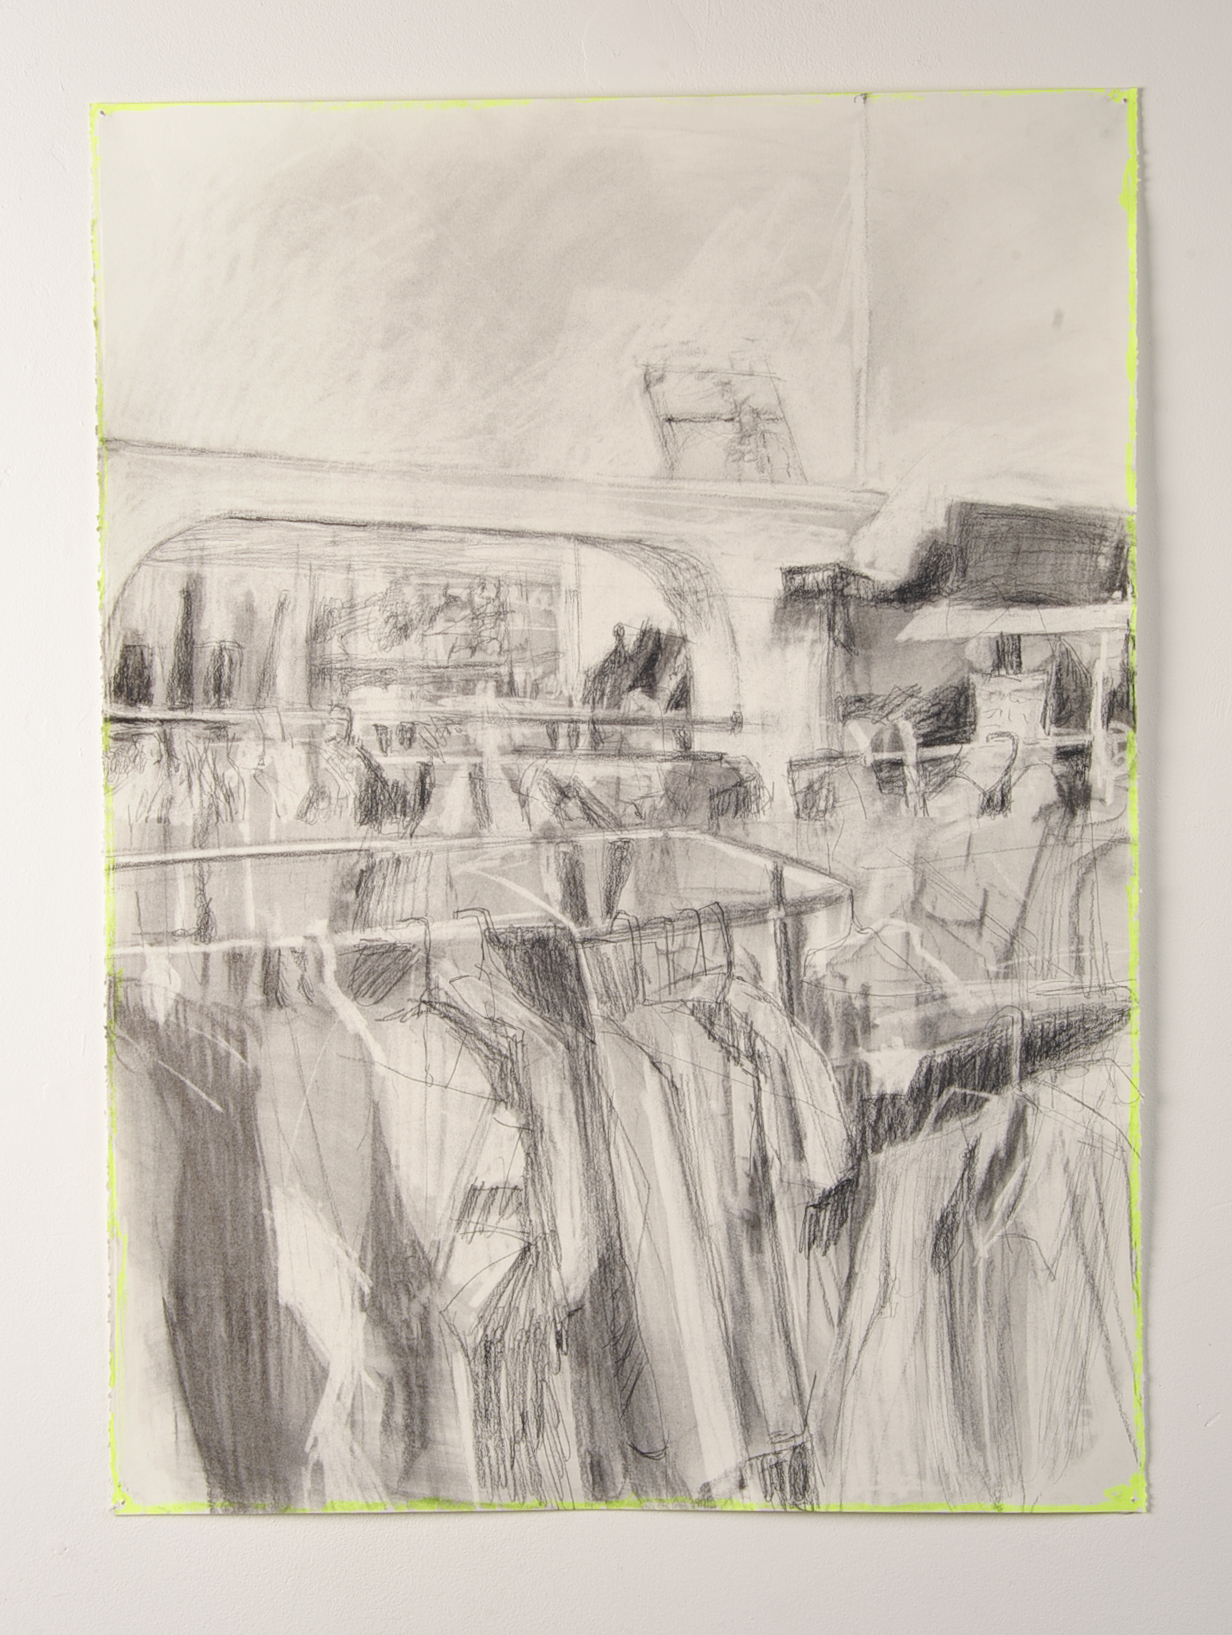  SHUTTER SPEED LUMINOSITY  Collected clothes  Charcoal and highlighter  59.4cm x 84.1cm, 2010    